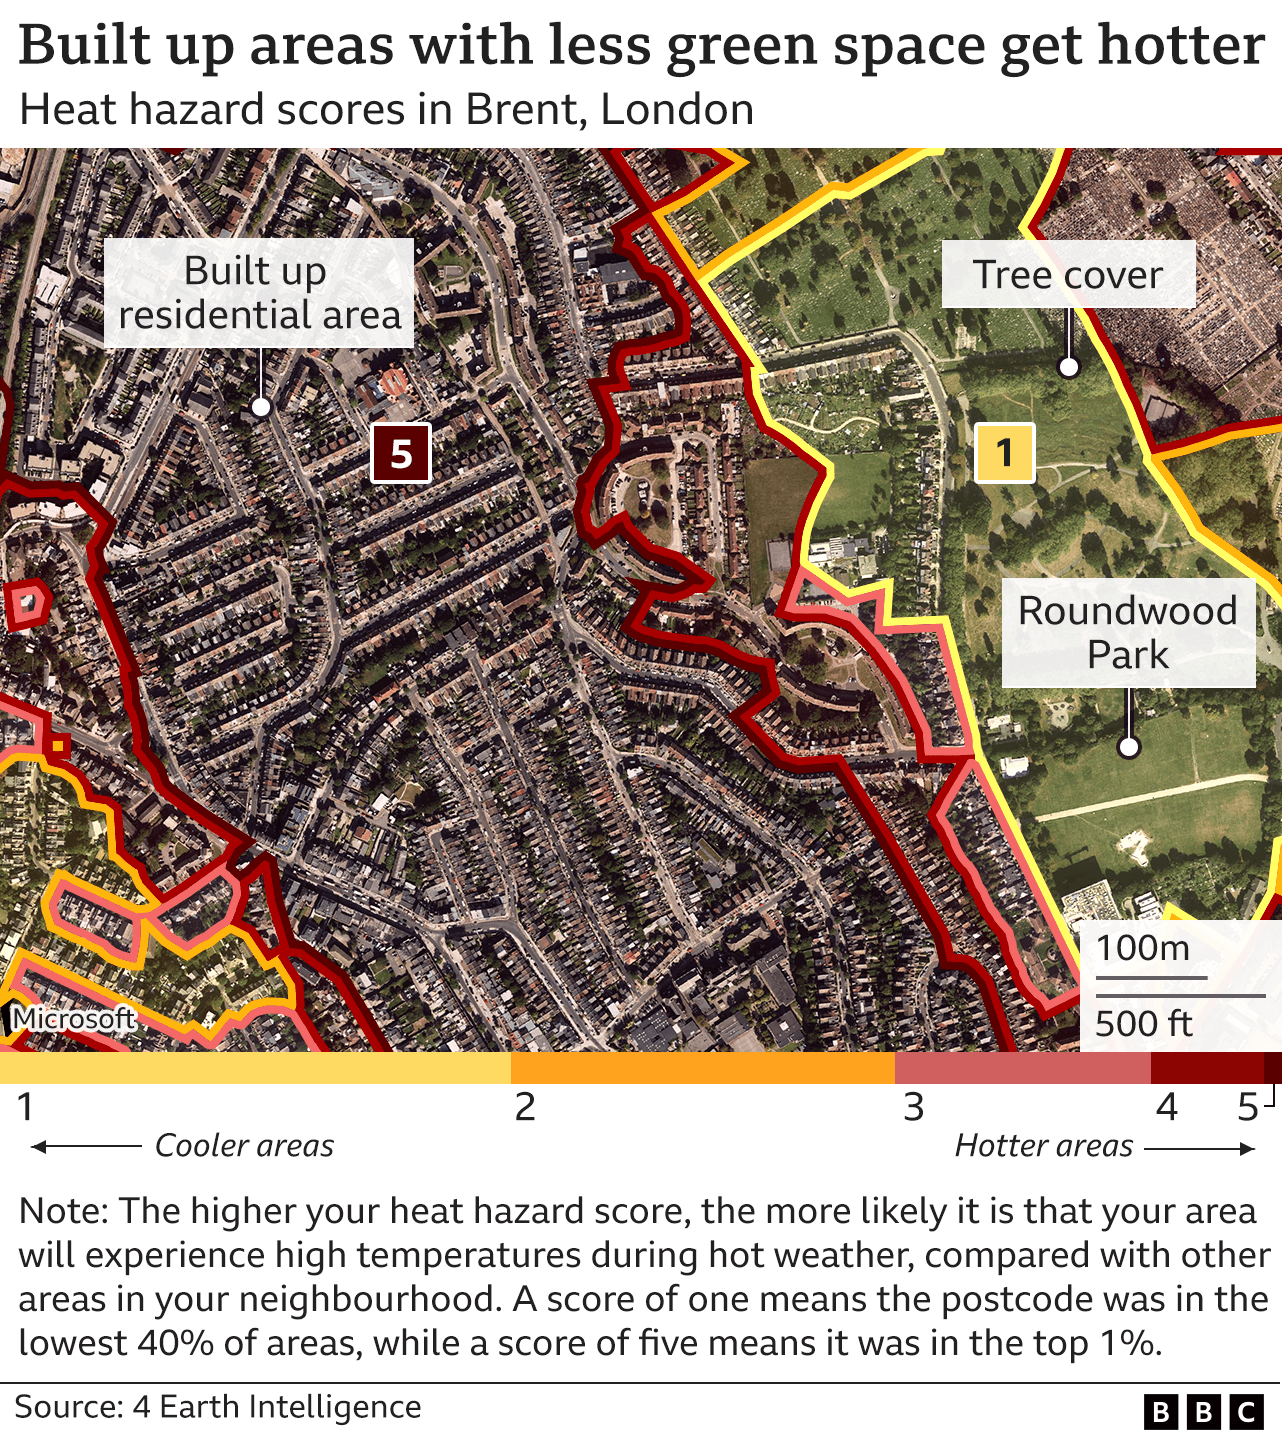 Map showing heat hazard areas in Brent, with areas near green spaces showing a lower hazard score